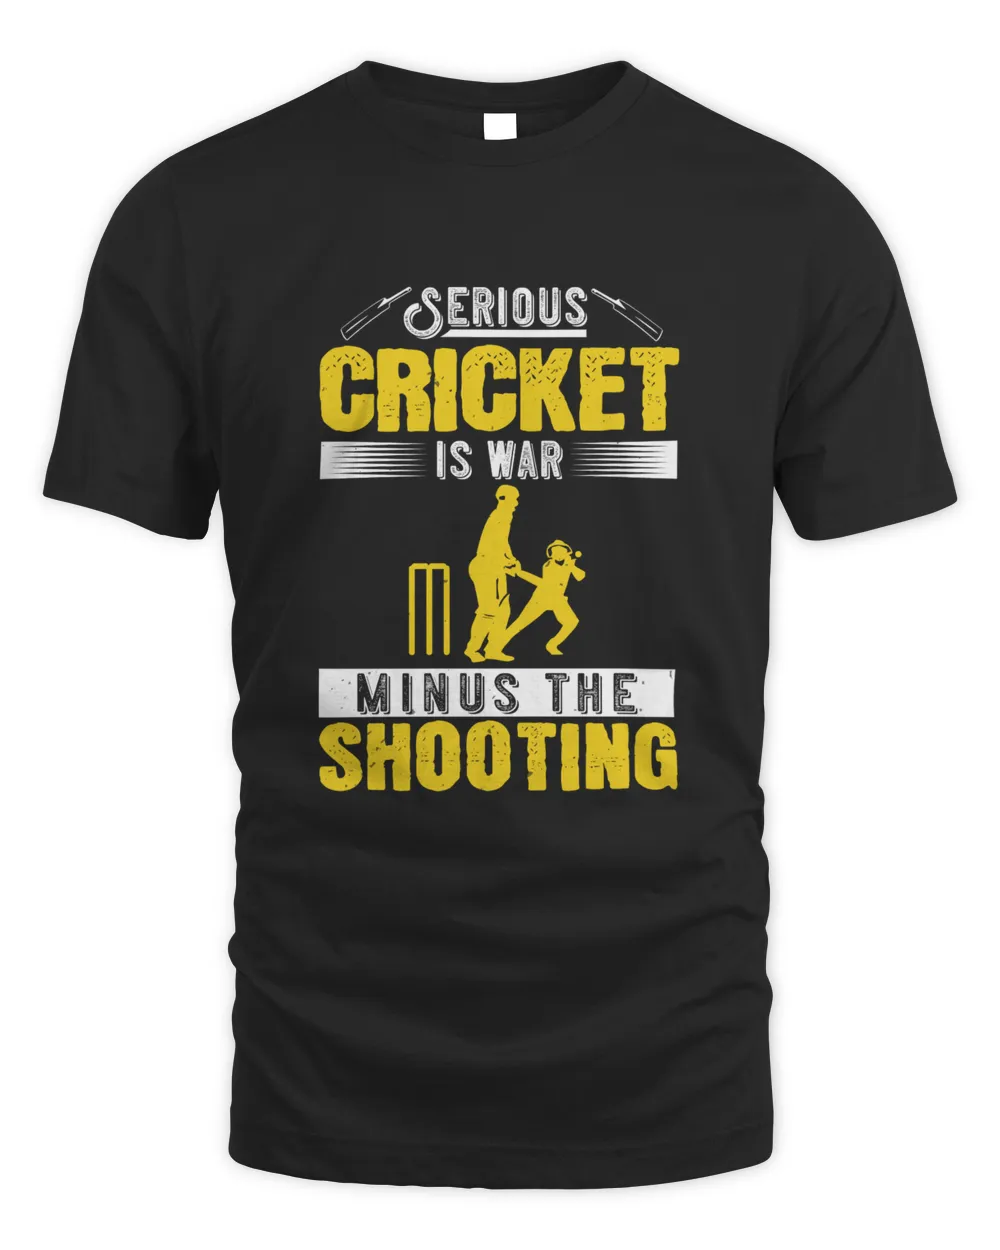 Serious cricket is war minus the shooting-01